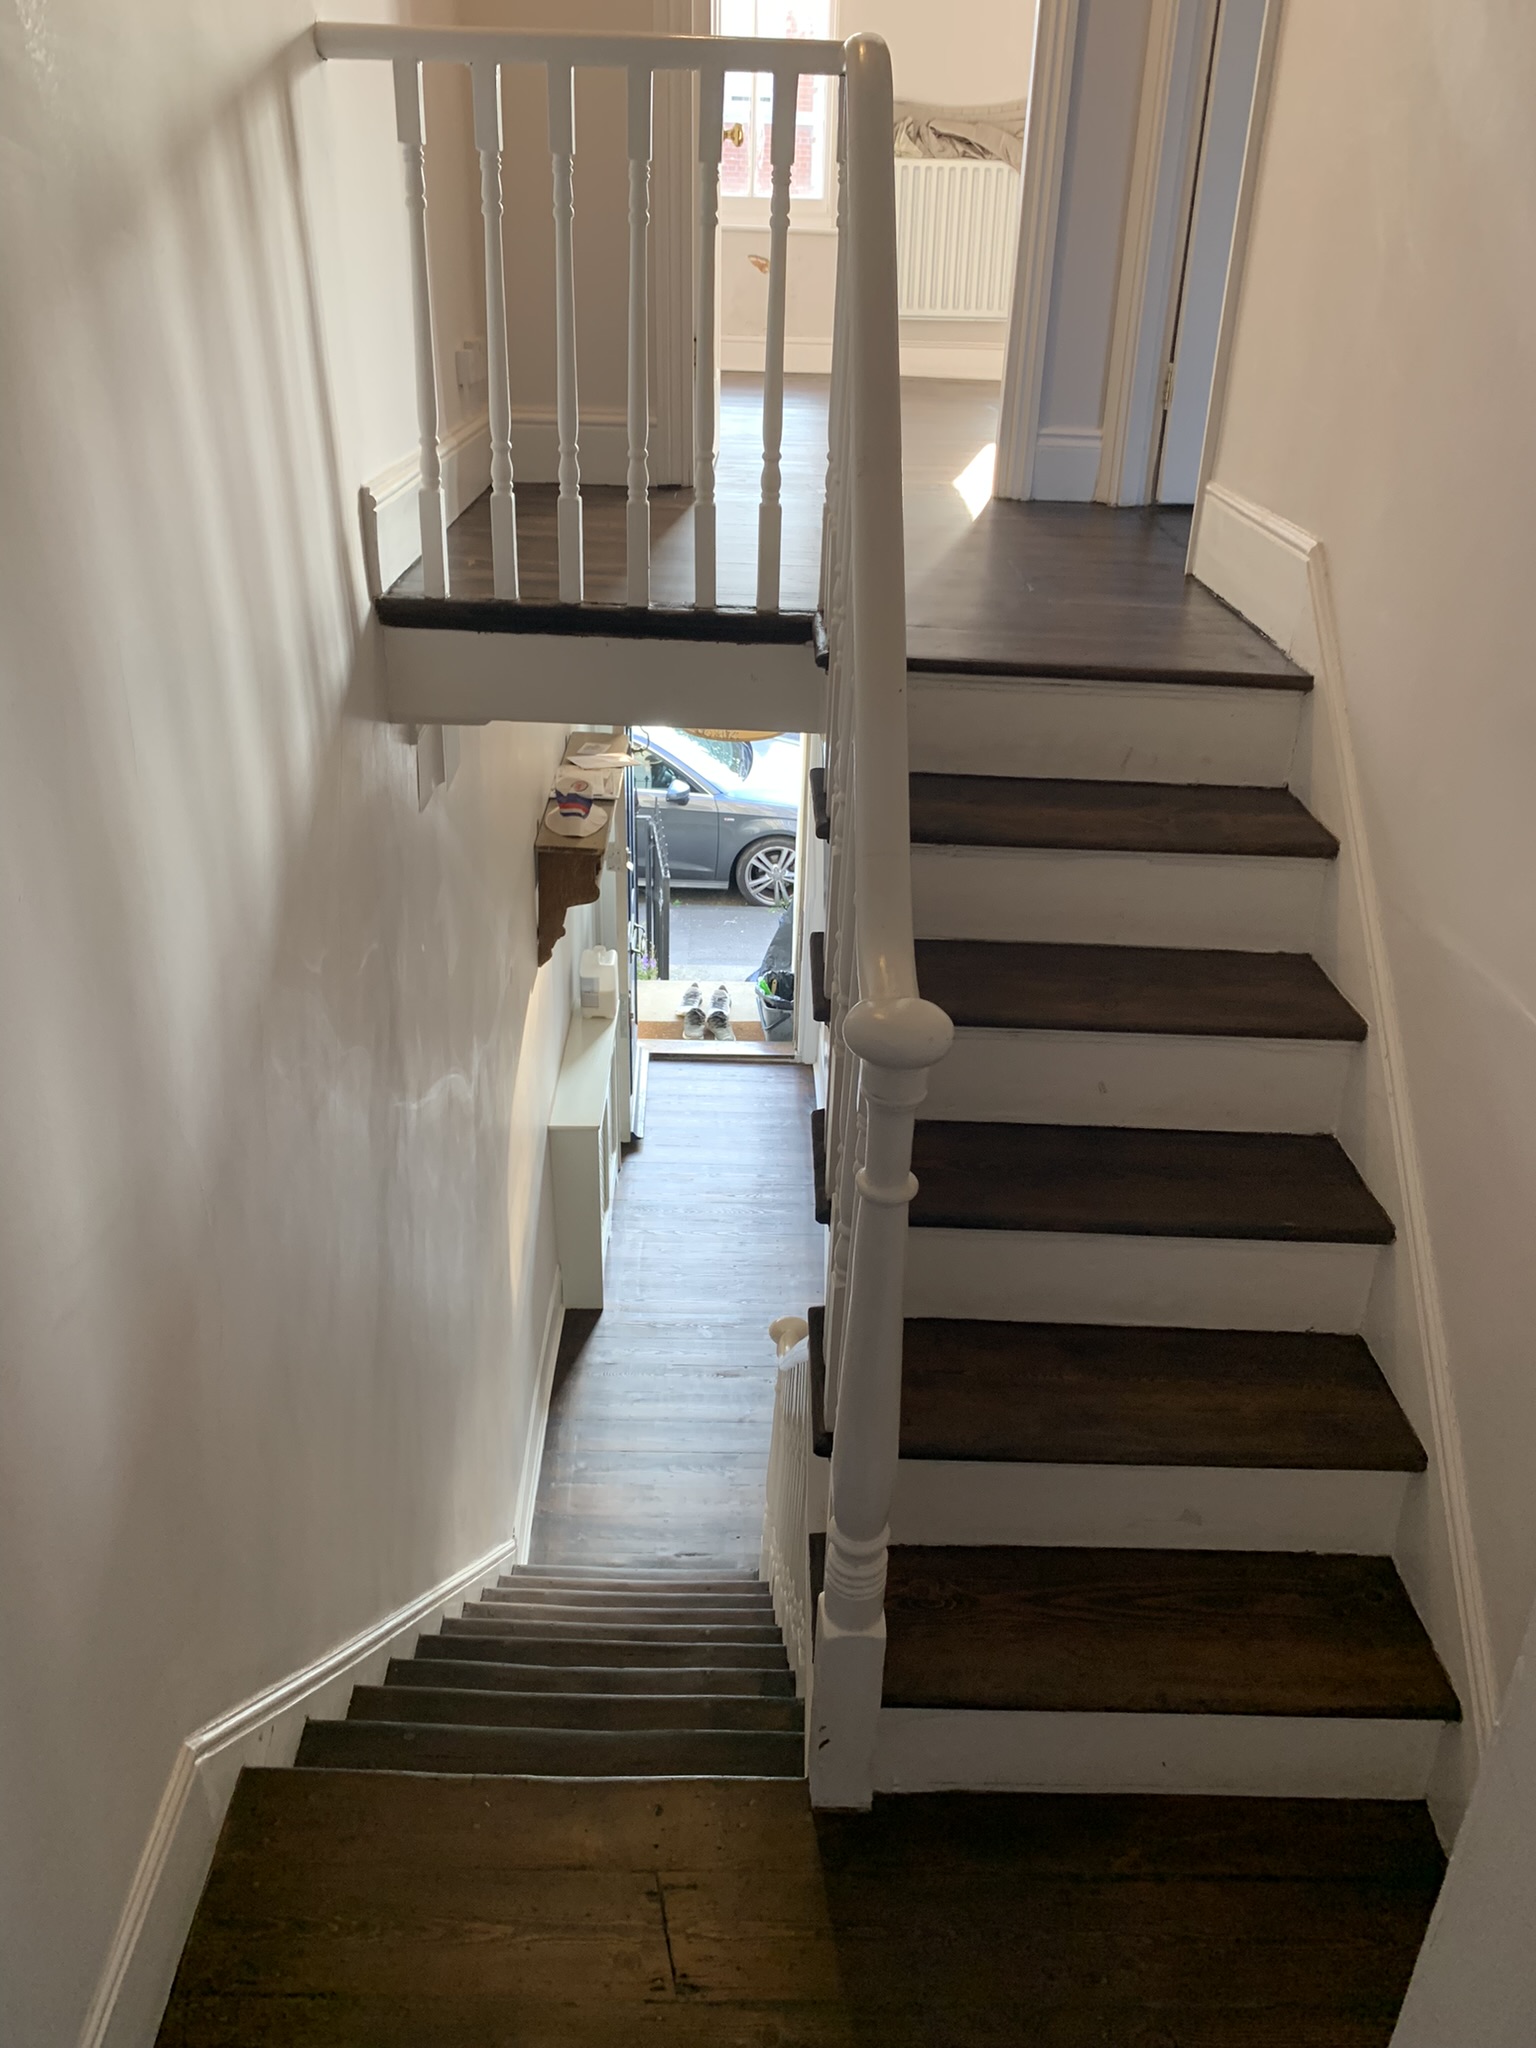 Stairs and bannisters Sanding